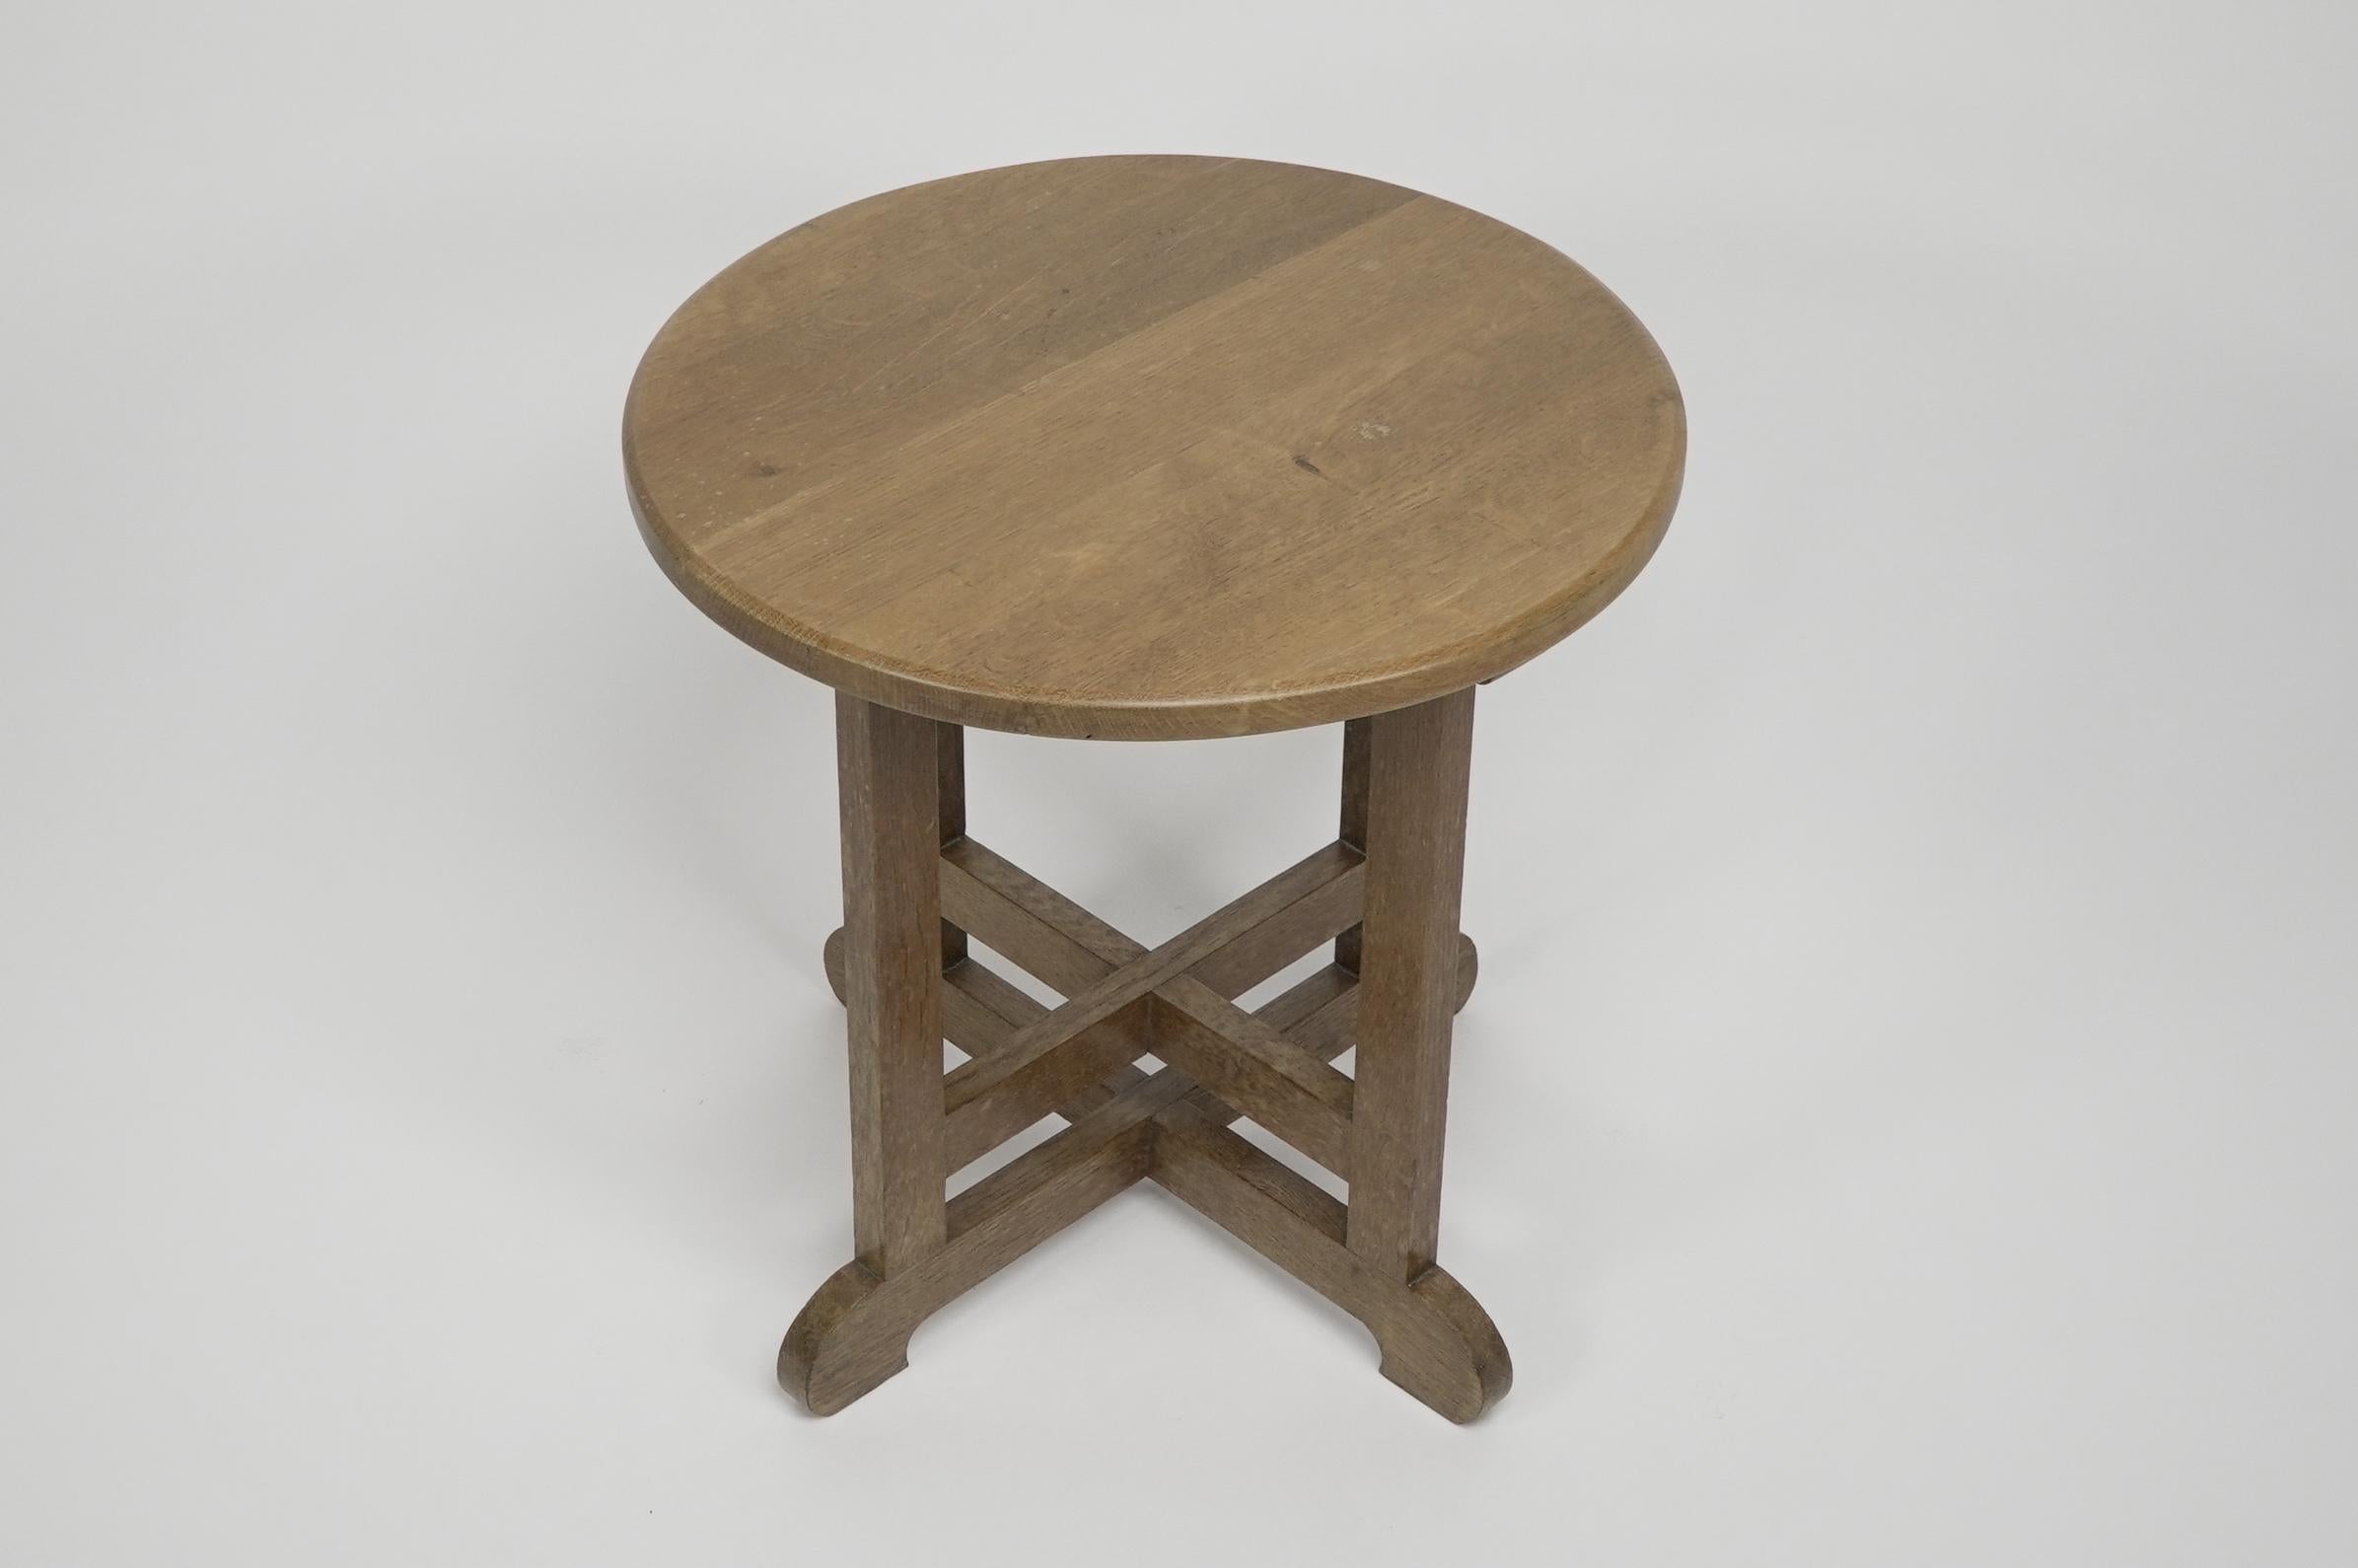 Heals, in the style of. An oak Arts and Crafts circular oak side or occasional table with double cross stretchers making a stronger design detail, raised on little curved feet.